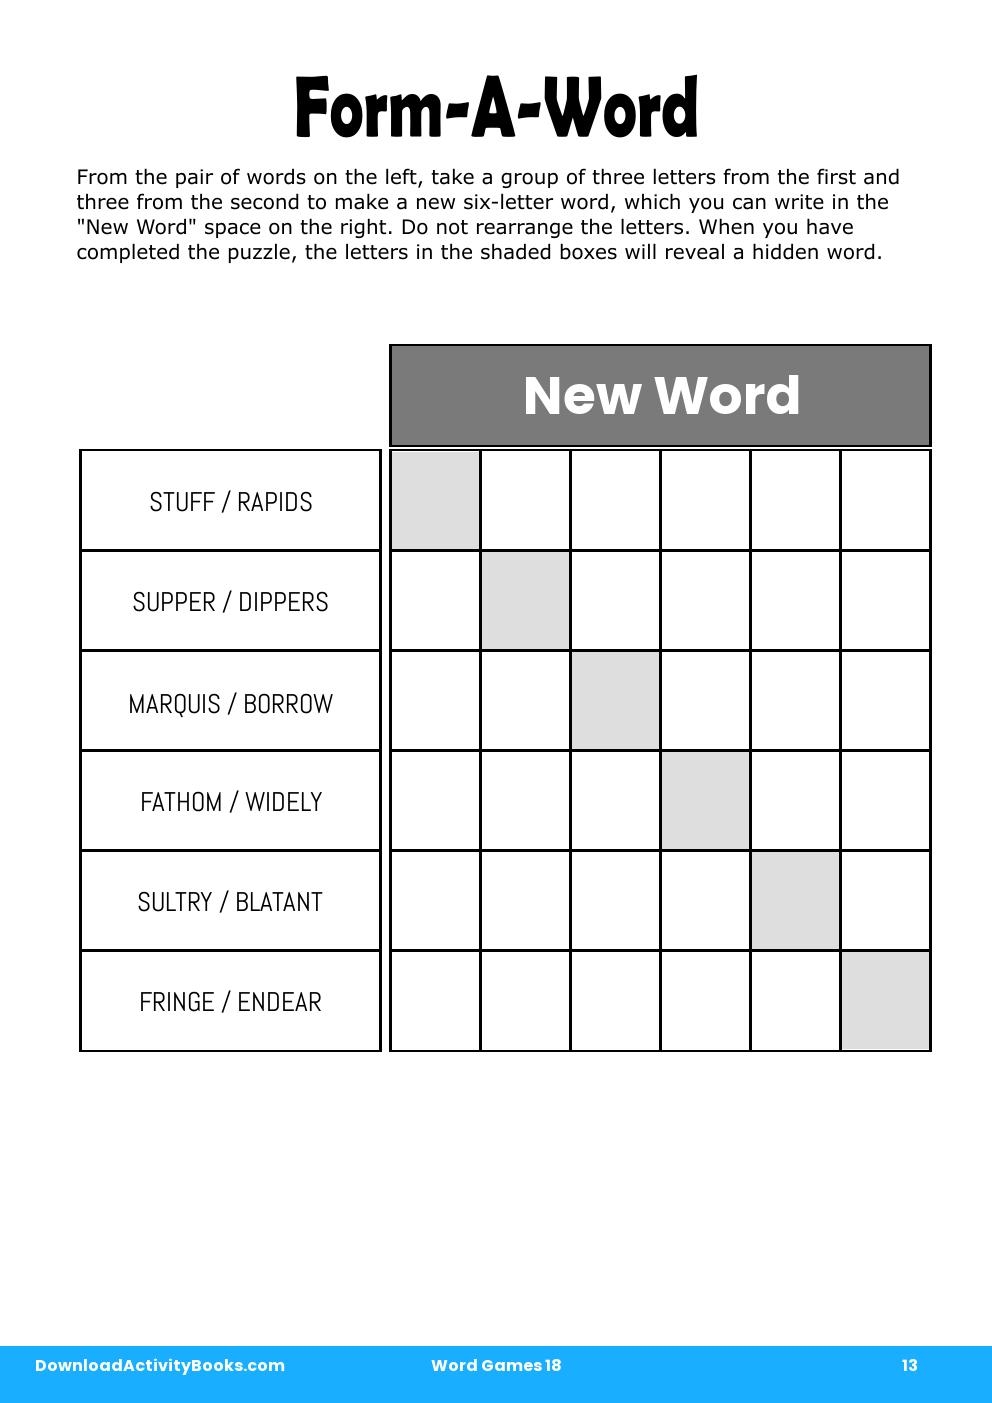 Form-A-Word in Word Games 18